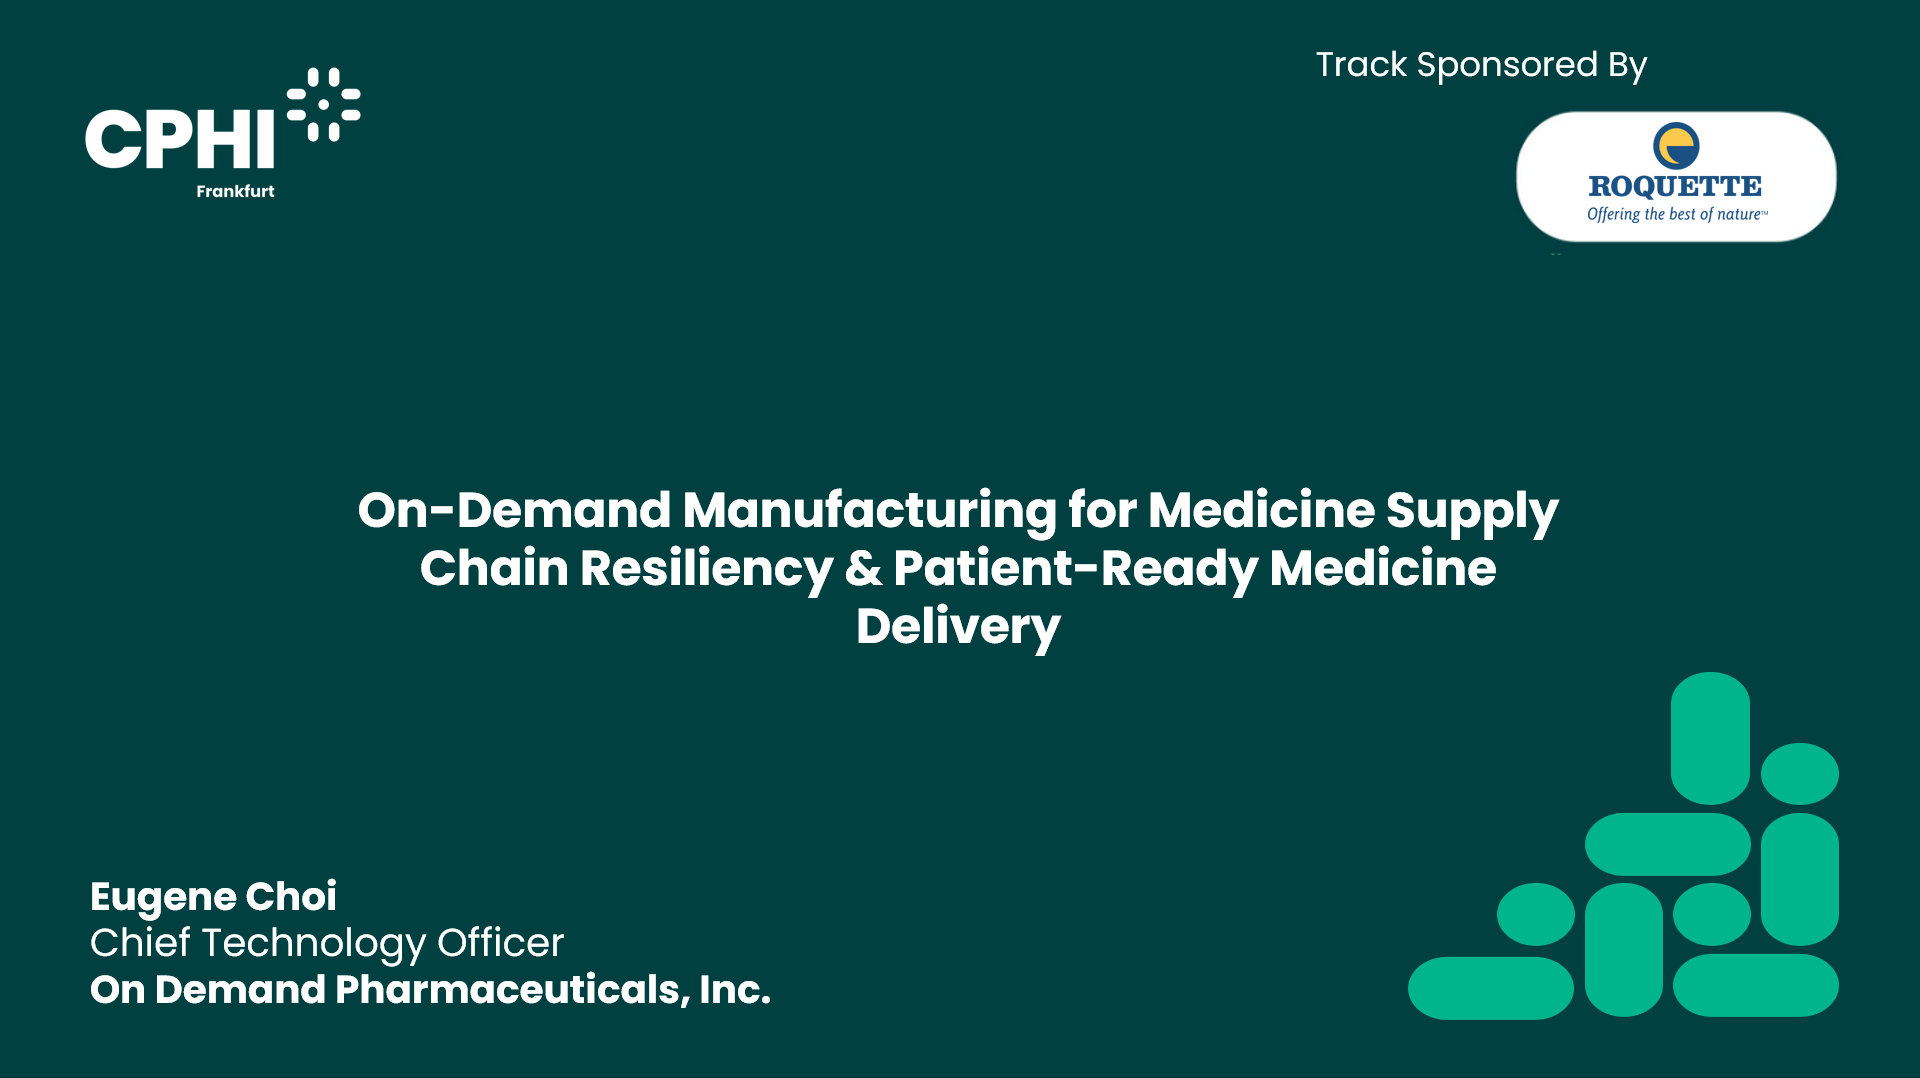 On-Demand Manufacturing for Medicine Supply Chain Resiliency & Patient-Ready Medicine Delivery